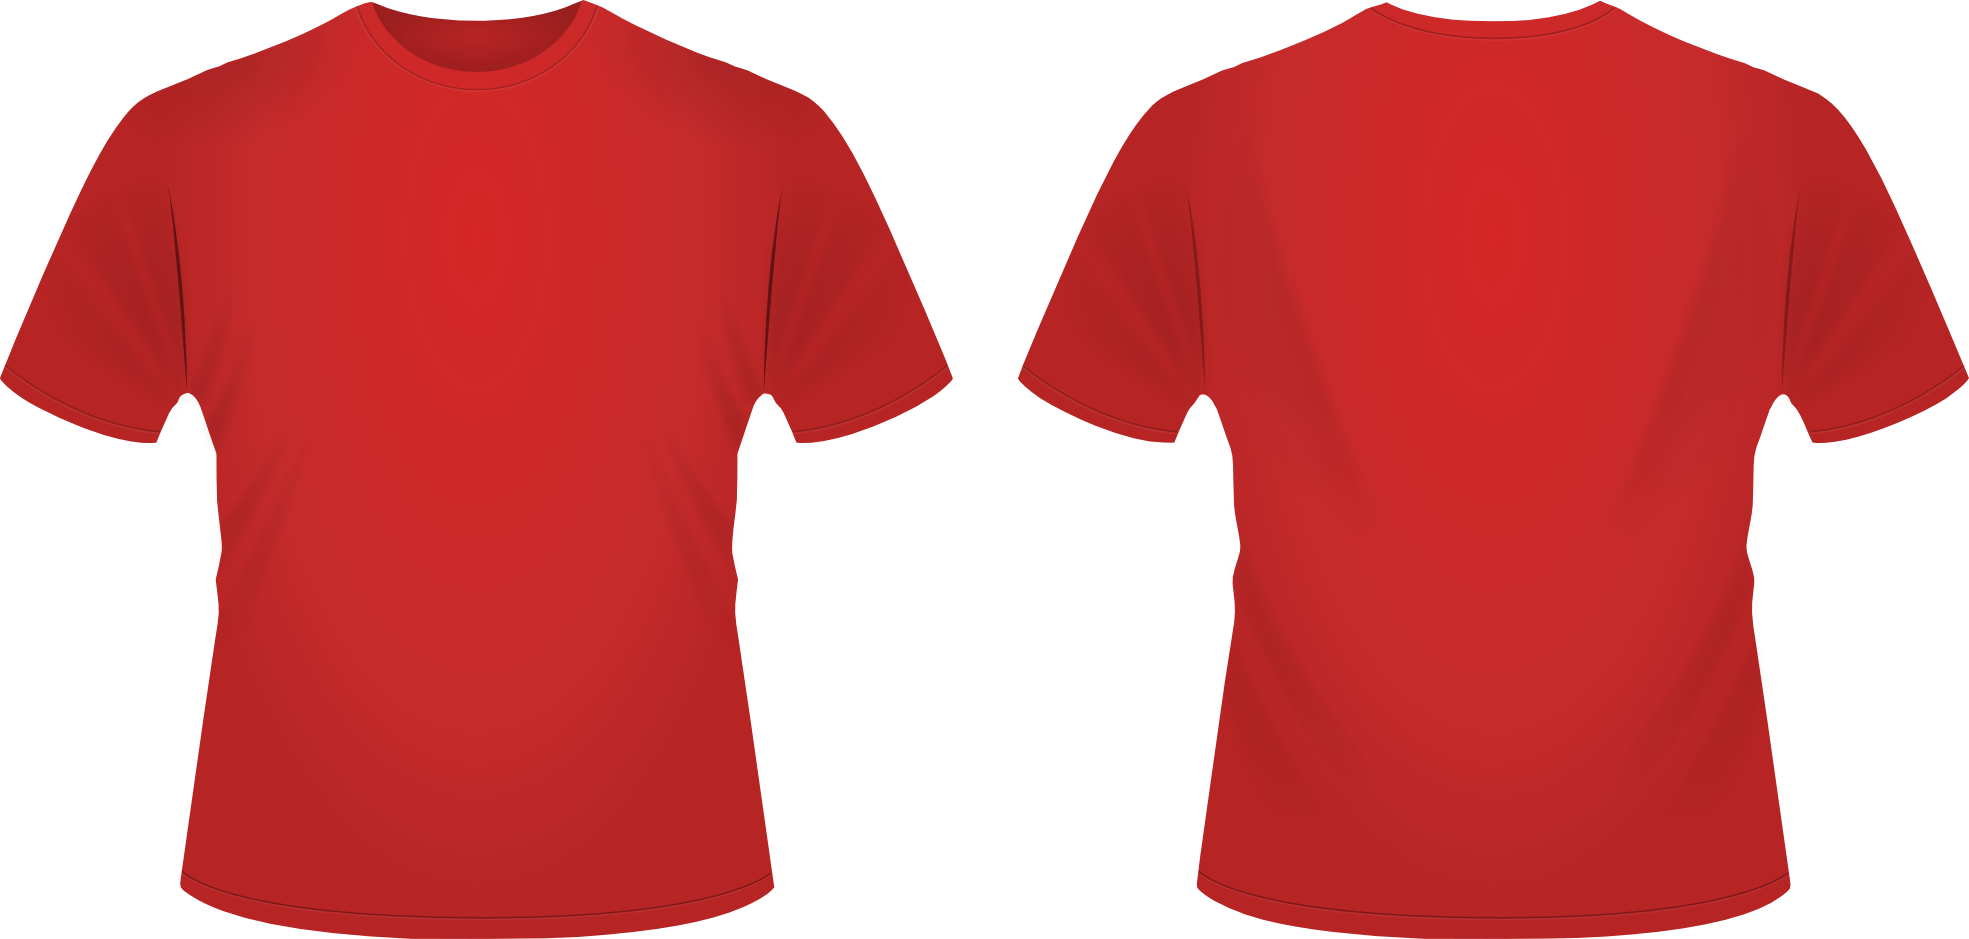 Plain Red T-Shirt PNG Picture | PNG Arts